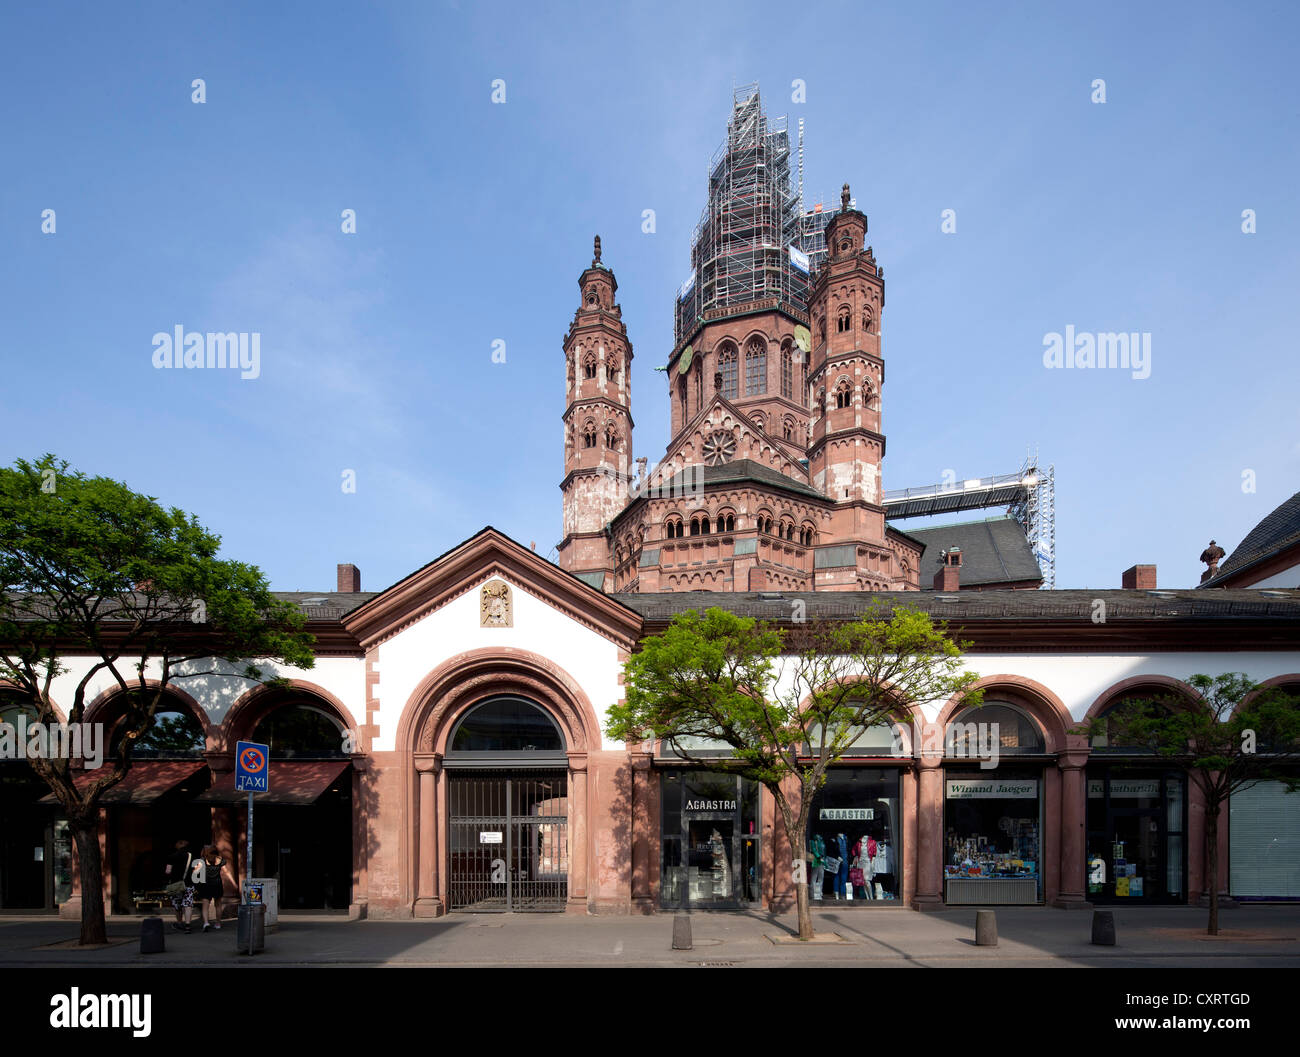 Mainz Cathedral or St. Martin's Cathedral, Mainz, Rhineland-Palatinate, Germany, Europe, PublicGround Stock Photo